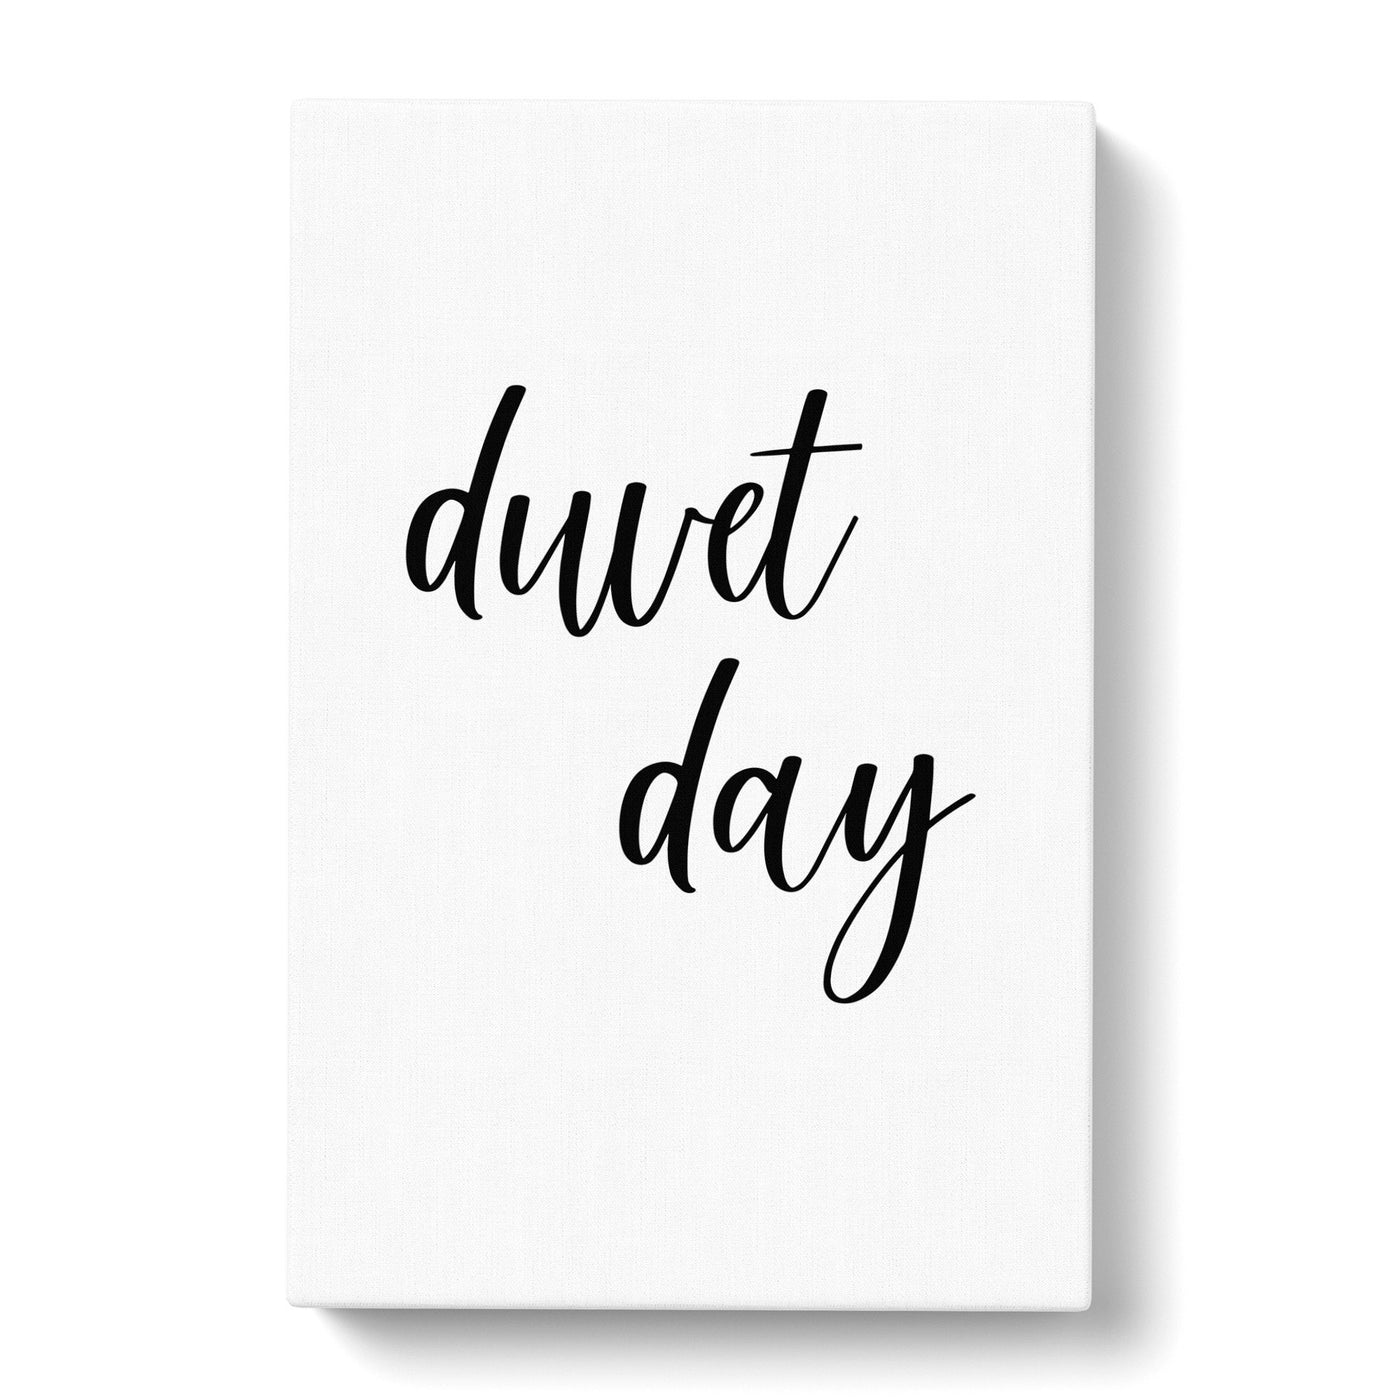 Duvet Day Typography Canvas Print Main Image